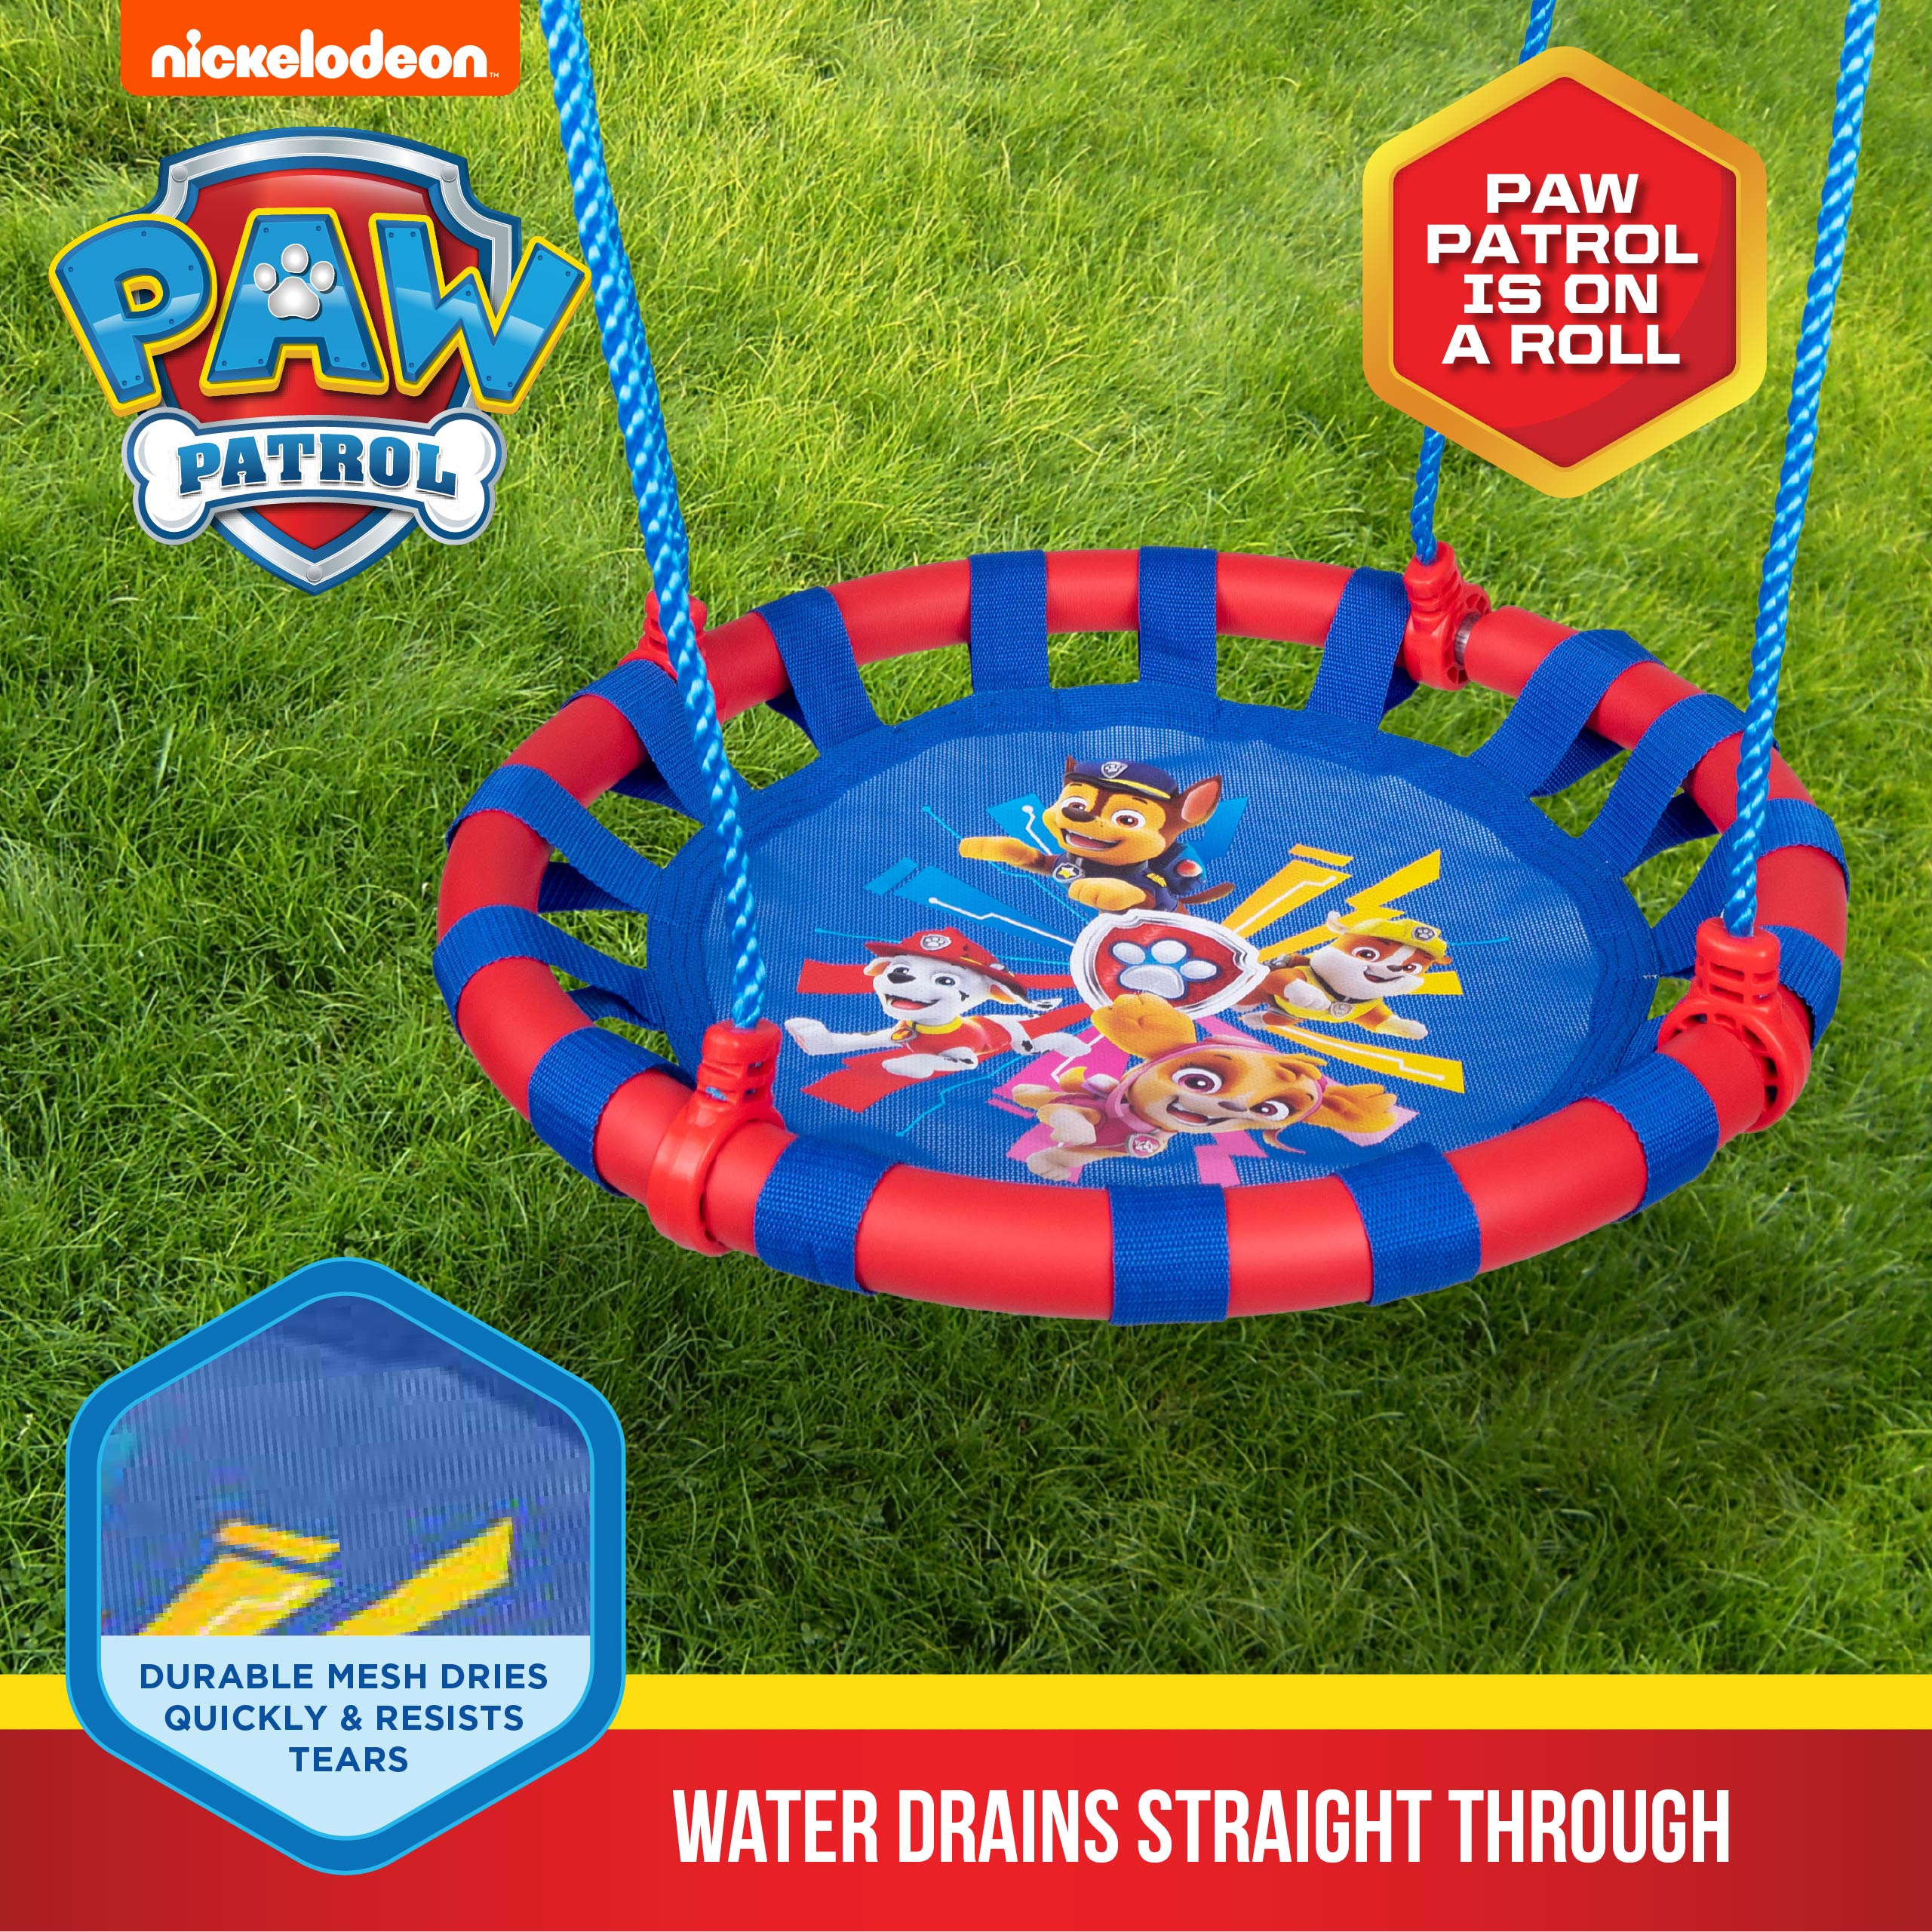 Paw Patrol 24" and 40" Saucer Tree Swings, Ages 3+